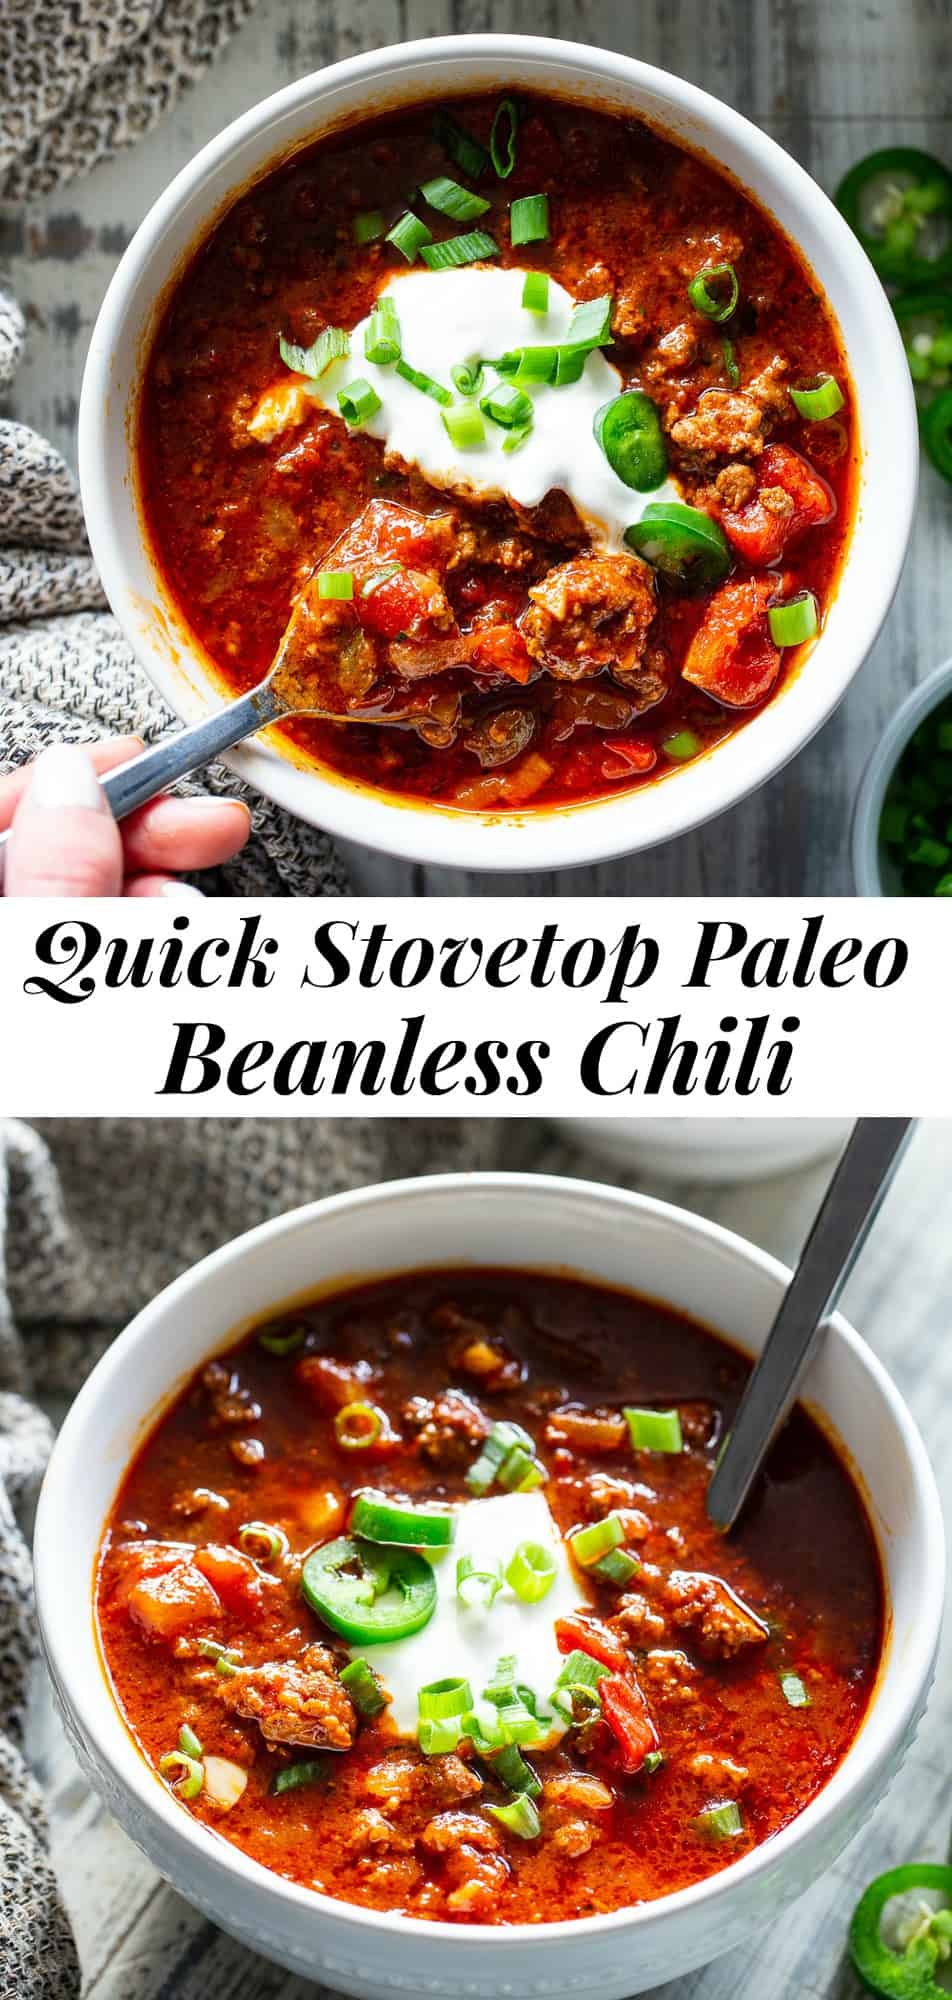 A fast stovetop beanless chili that’s packed with flavor and just the right amount of spice.  This hearty chili is great for weeknights served on it’s own or with cauliflower rice for a healthy meal that’s paleo and Whole30 compliant.  #paleo #whole30 #chili #cleaneating 